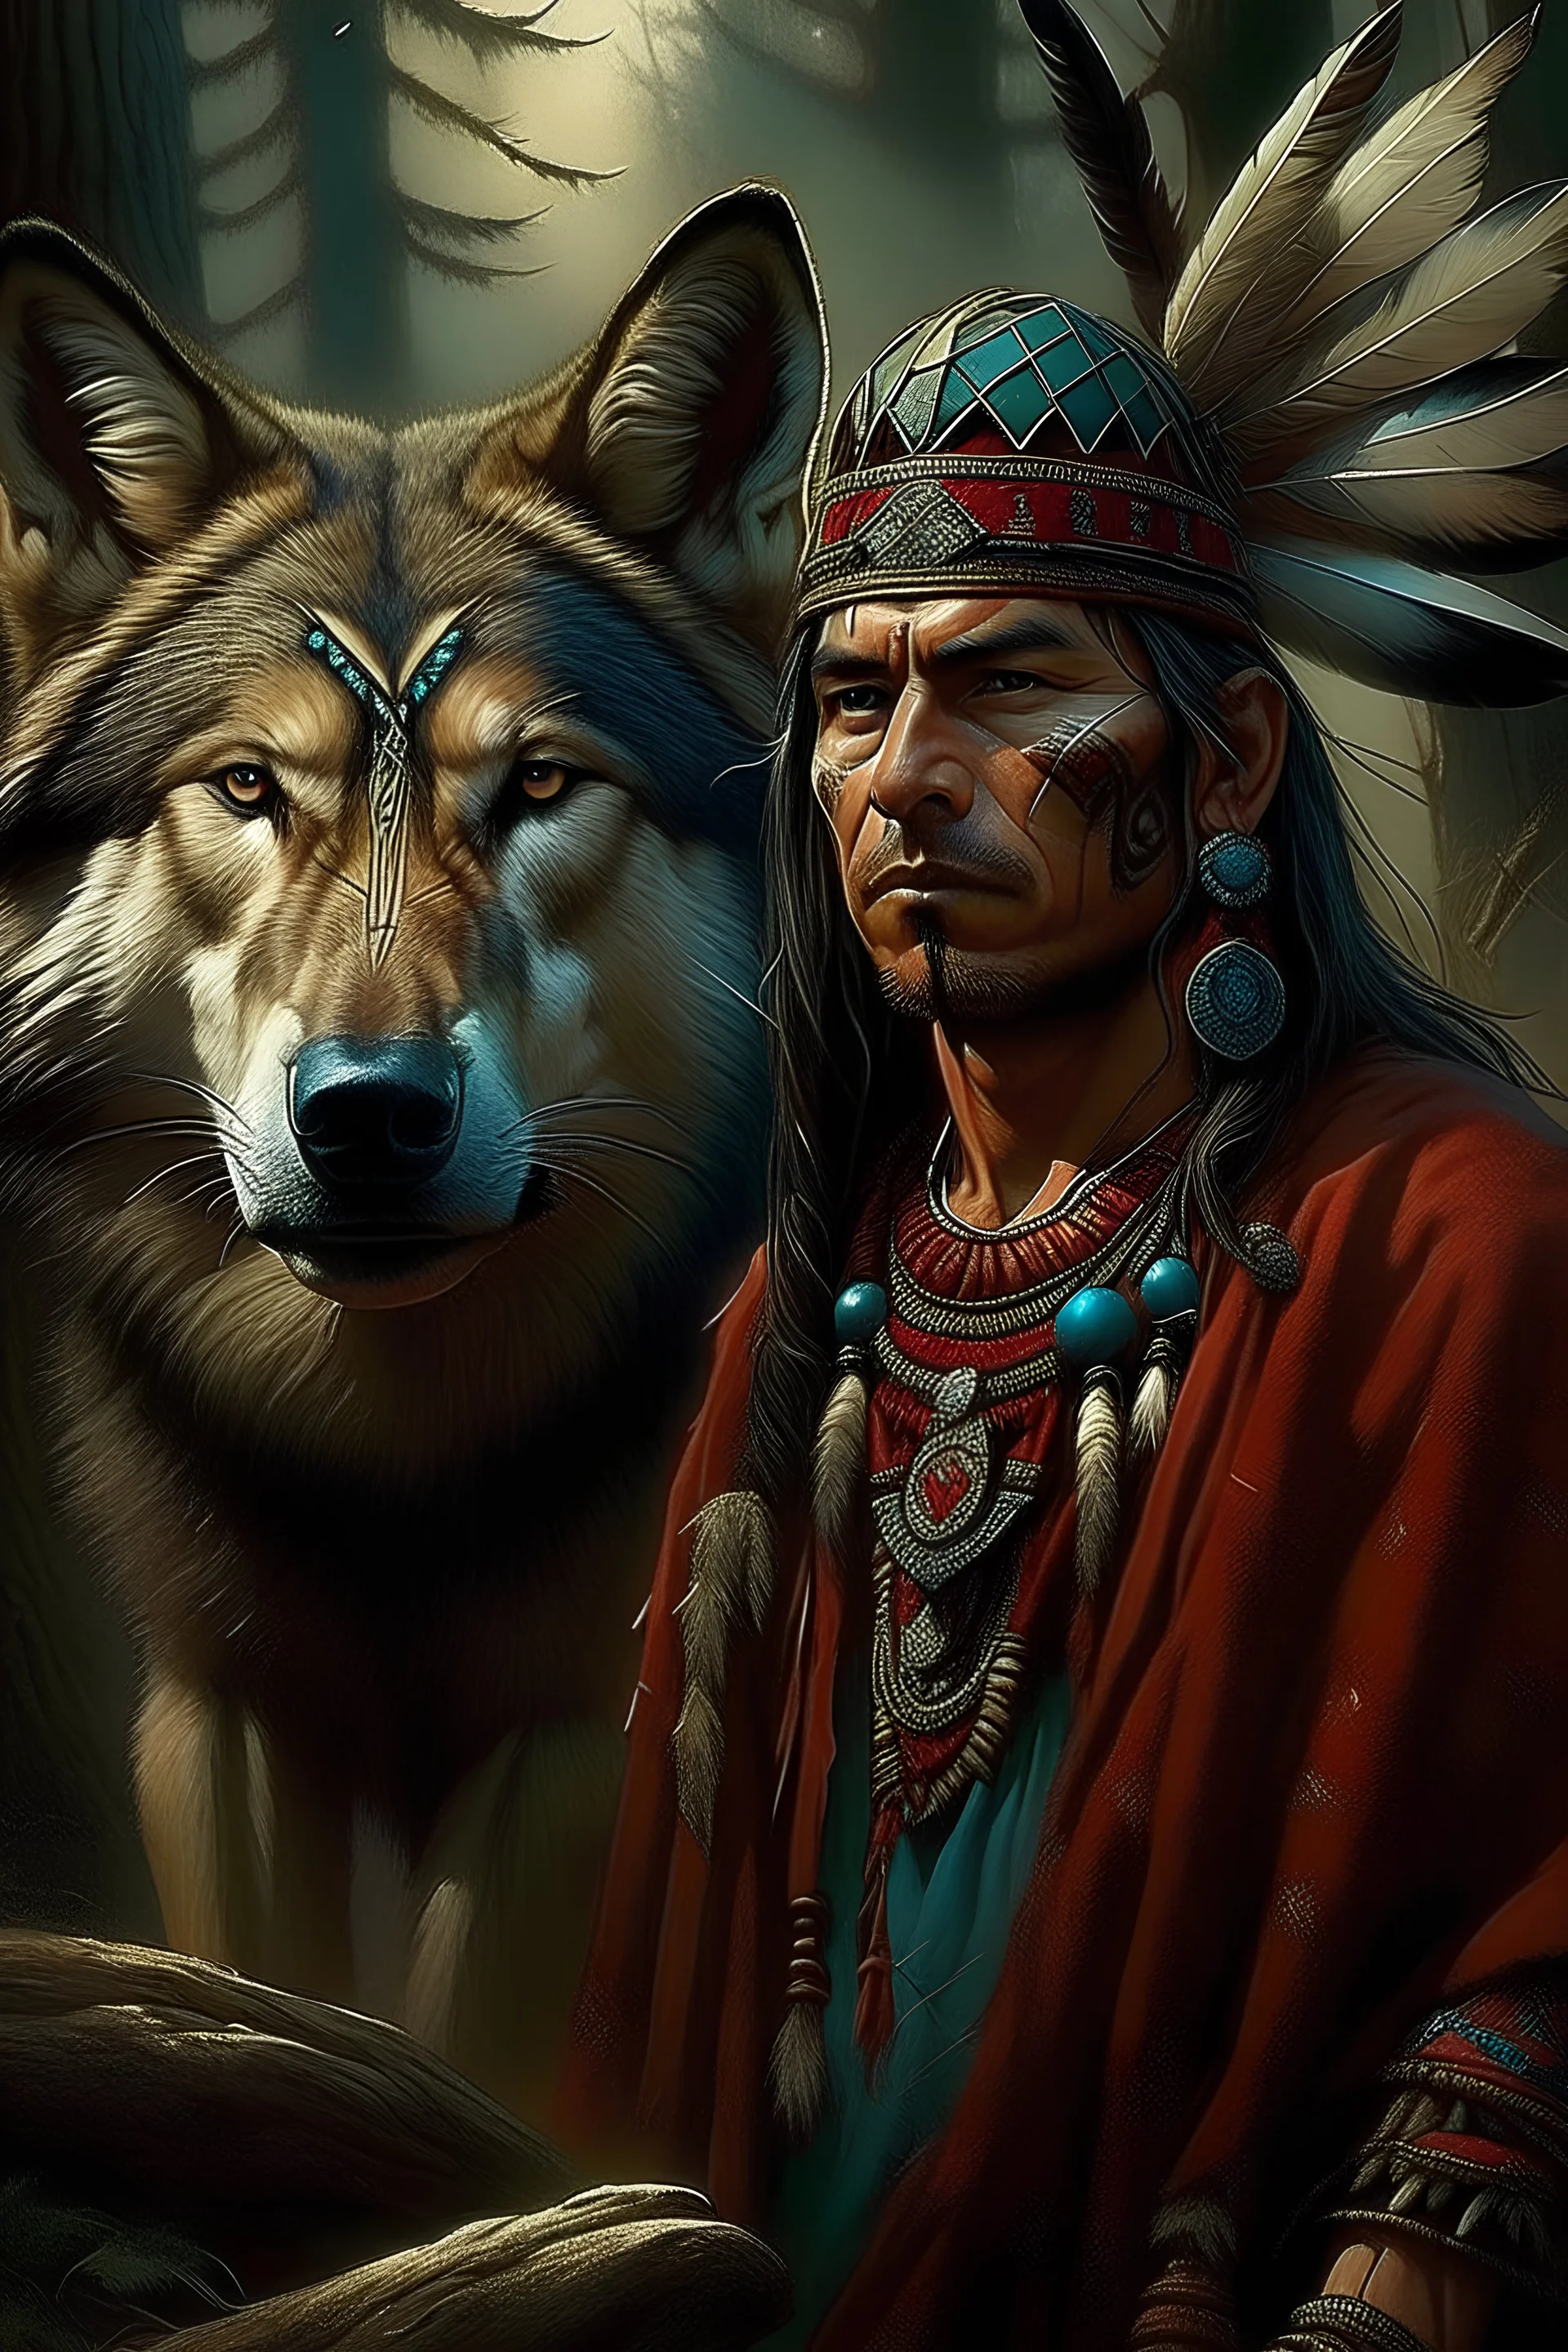 Extremely perfect cinematic humanized hyperrealistic image of Native American Indian and wolf, : native american shamen fantasy, Arte nativa americana, Nativo americano, Arte nativa, tribo antiga, Indigenous, Indian warrior, Guerreiro nativo americano, Um guerreiro nativo americano, INDIAN, Directed by: Stan Stokes, imagens tribais antigas, avian warrior, warrior spirit, awesome art, aboriginal, indigenous art, native american folk art, 16k, highes definition, rosto detalhado, rosto detalhado, o